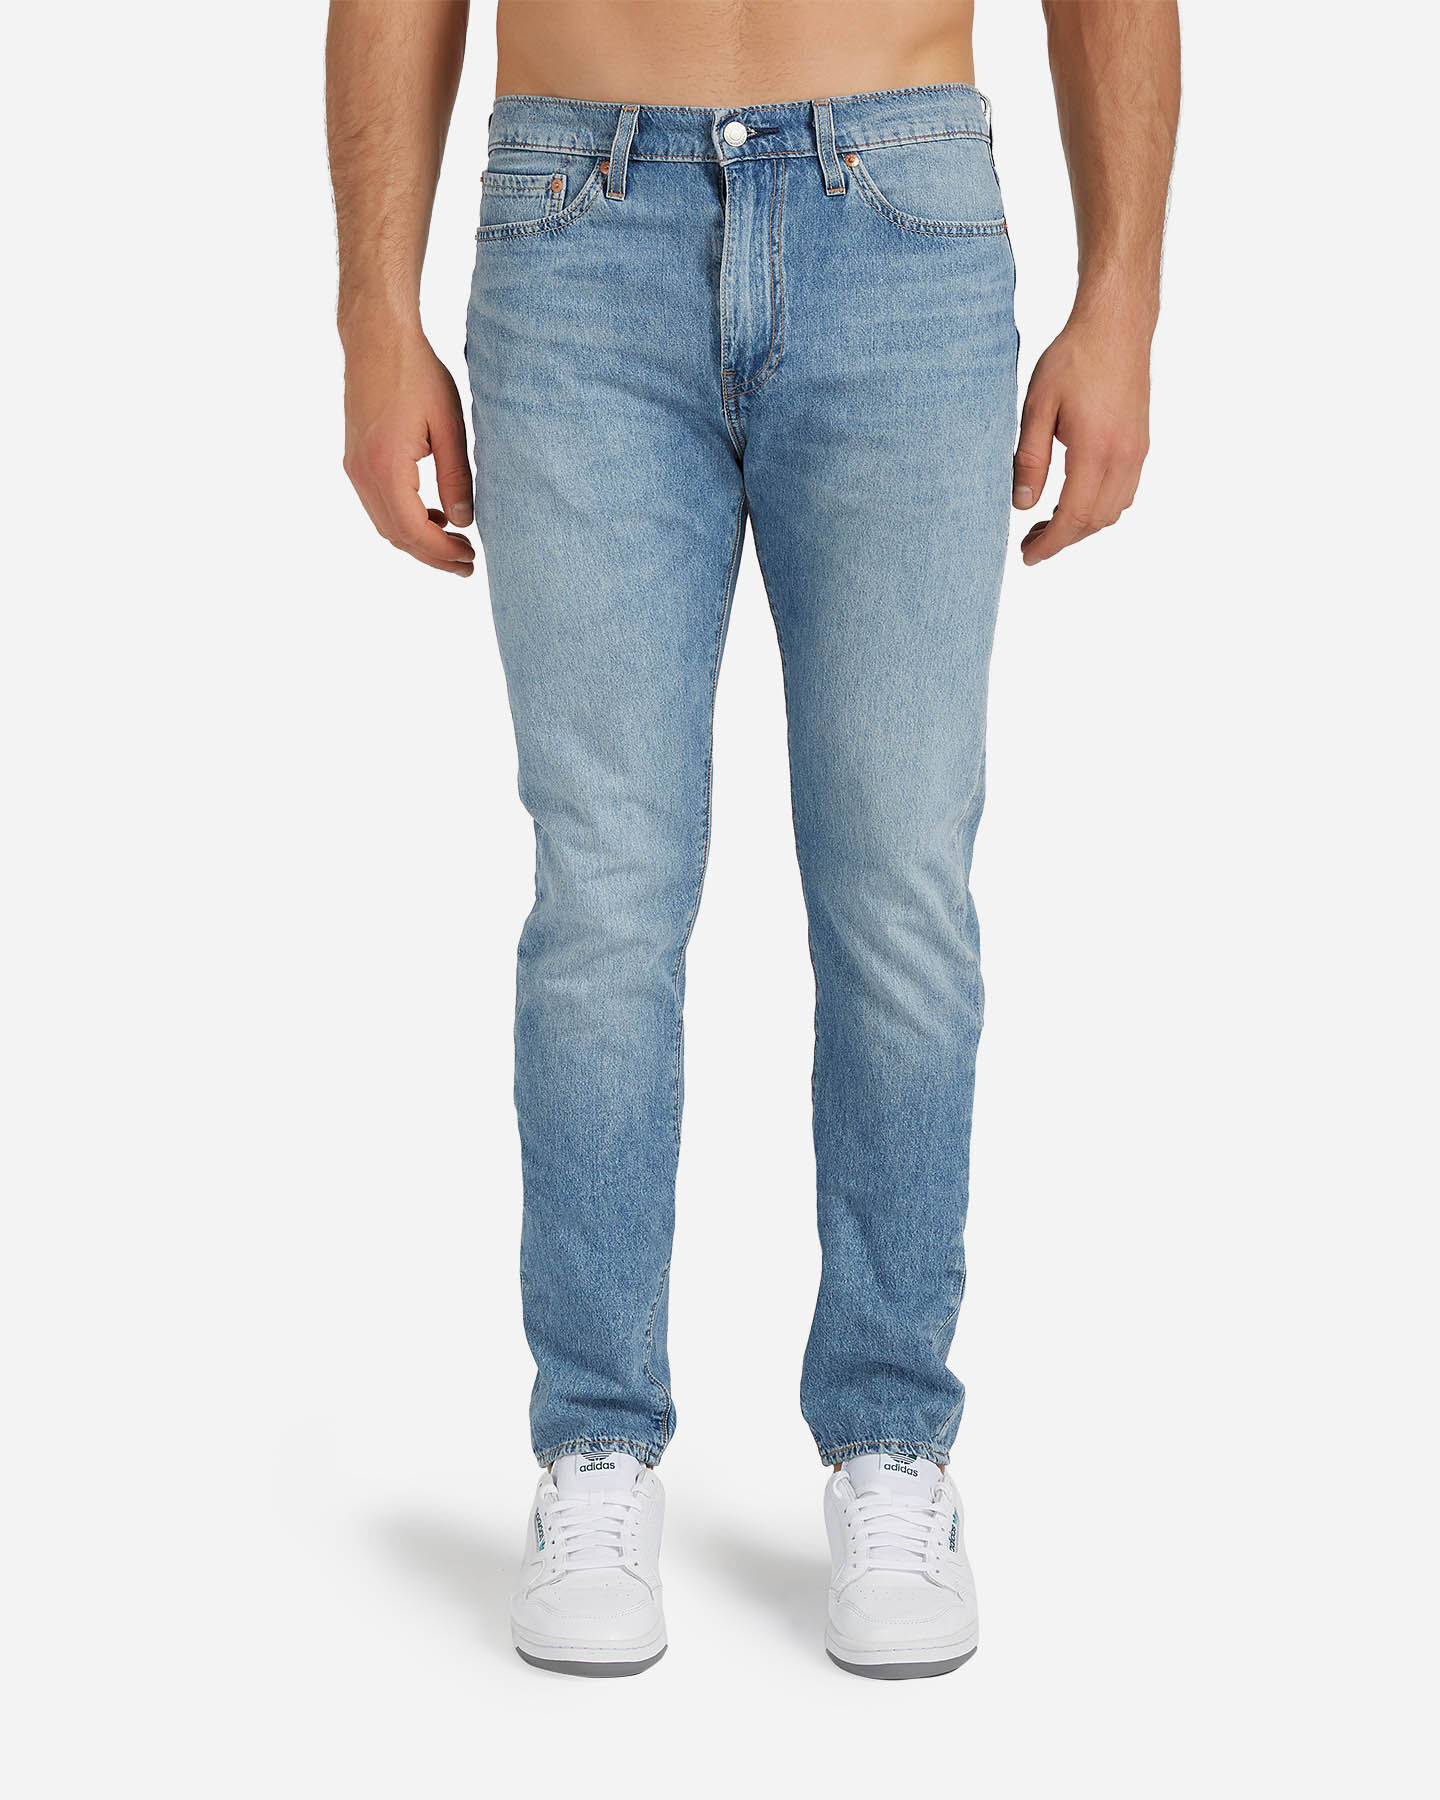  Jeans LEVI'S 510 SKINNY M S4076911|1051|30 scatto 0